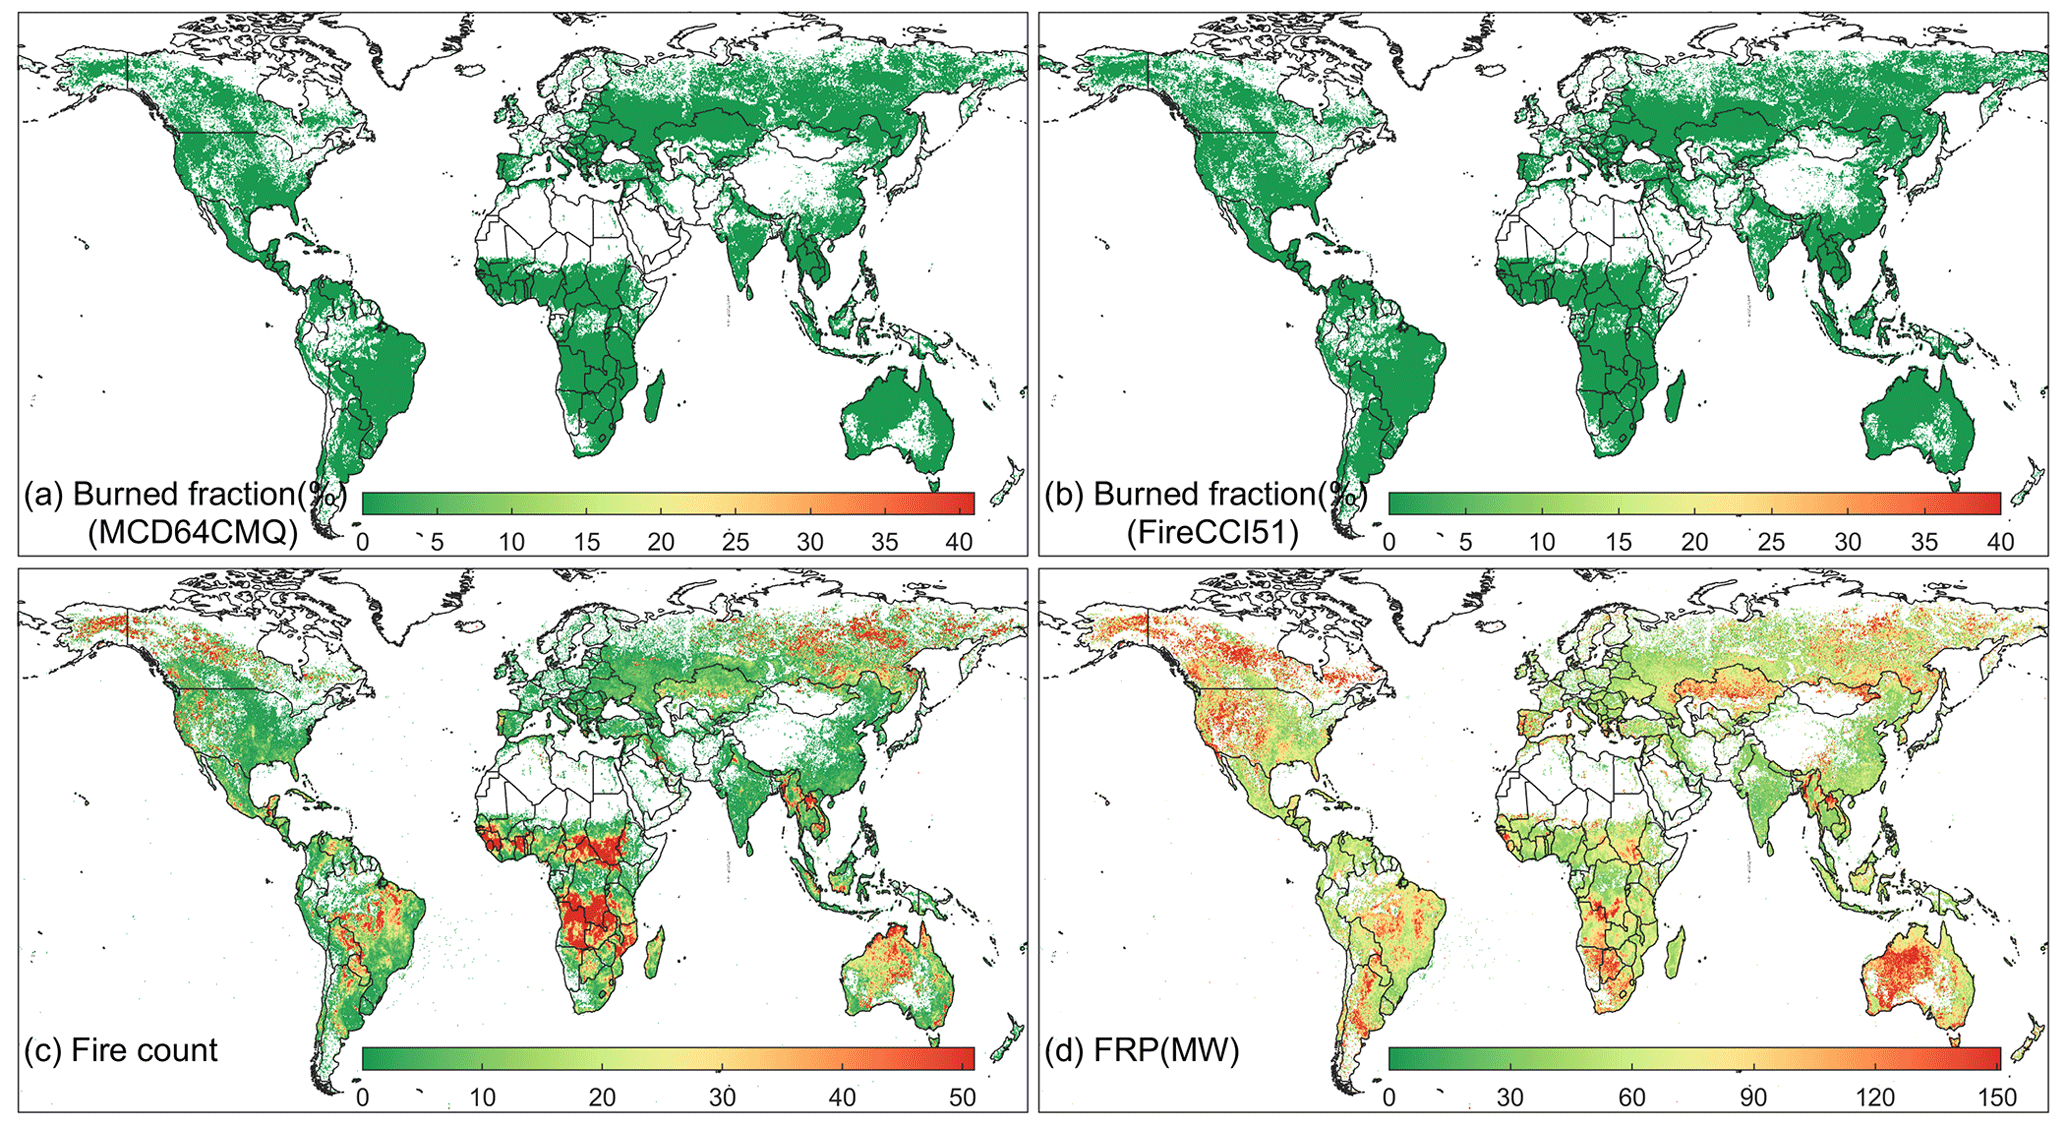 Spatial and temporal expansion of global wildland fire activity in response  to climate change